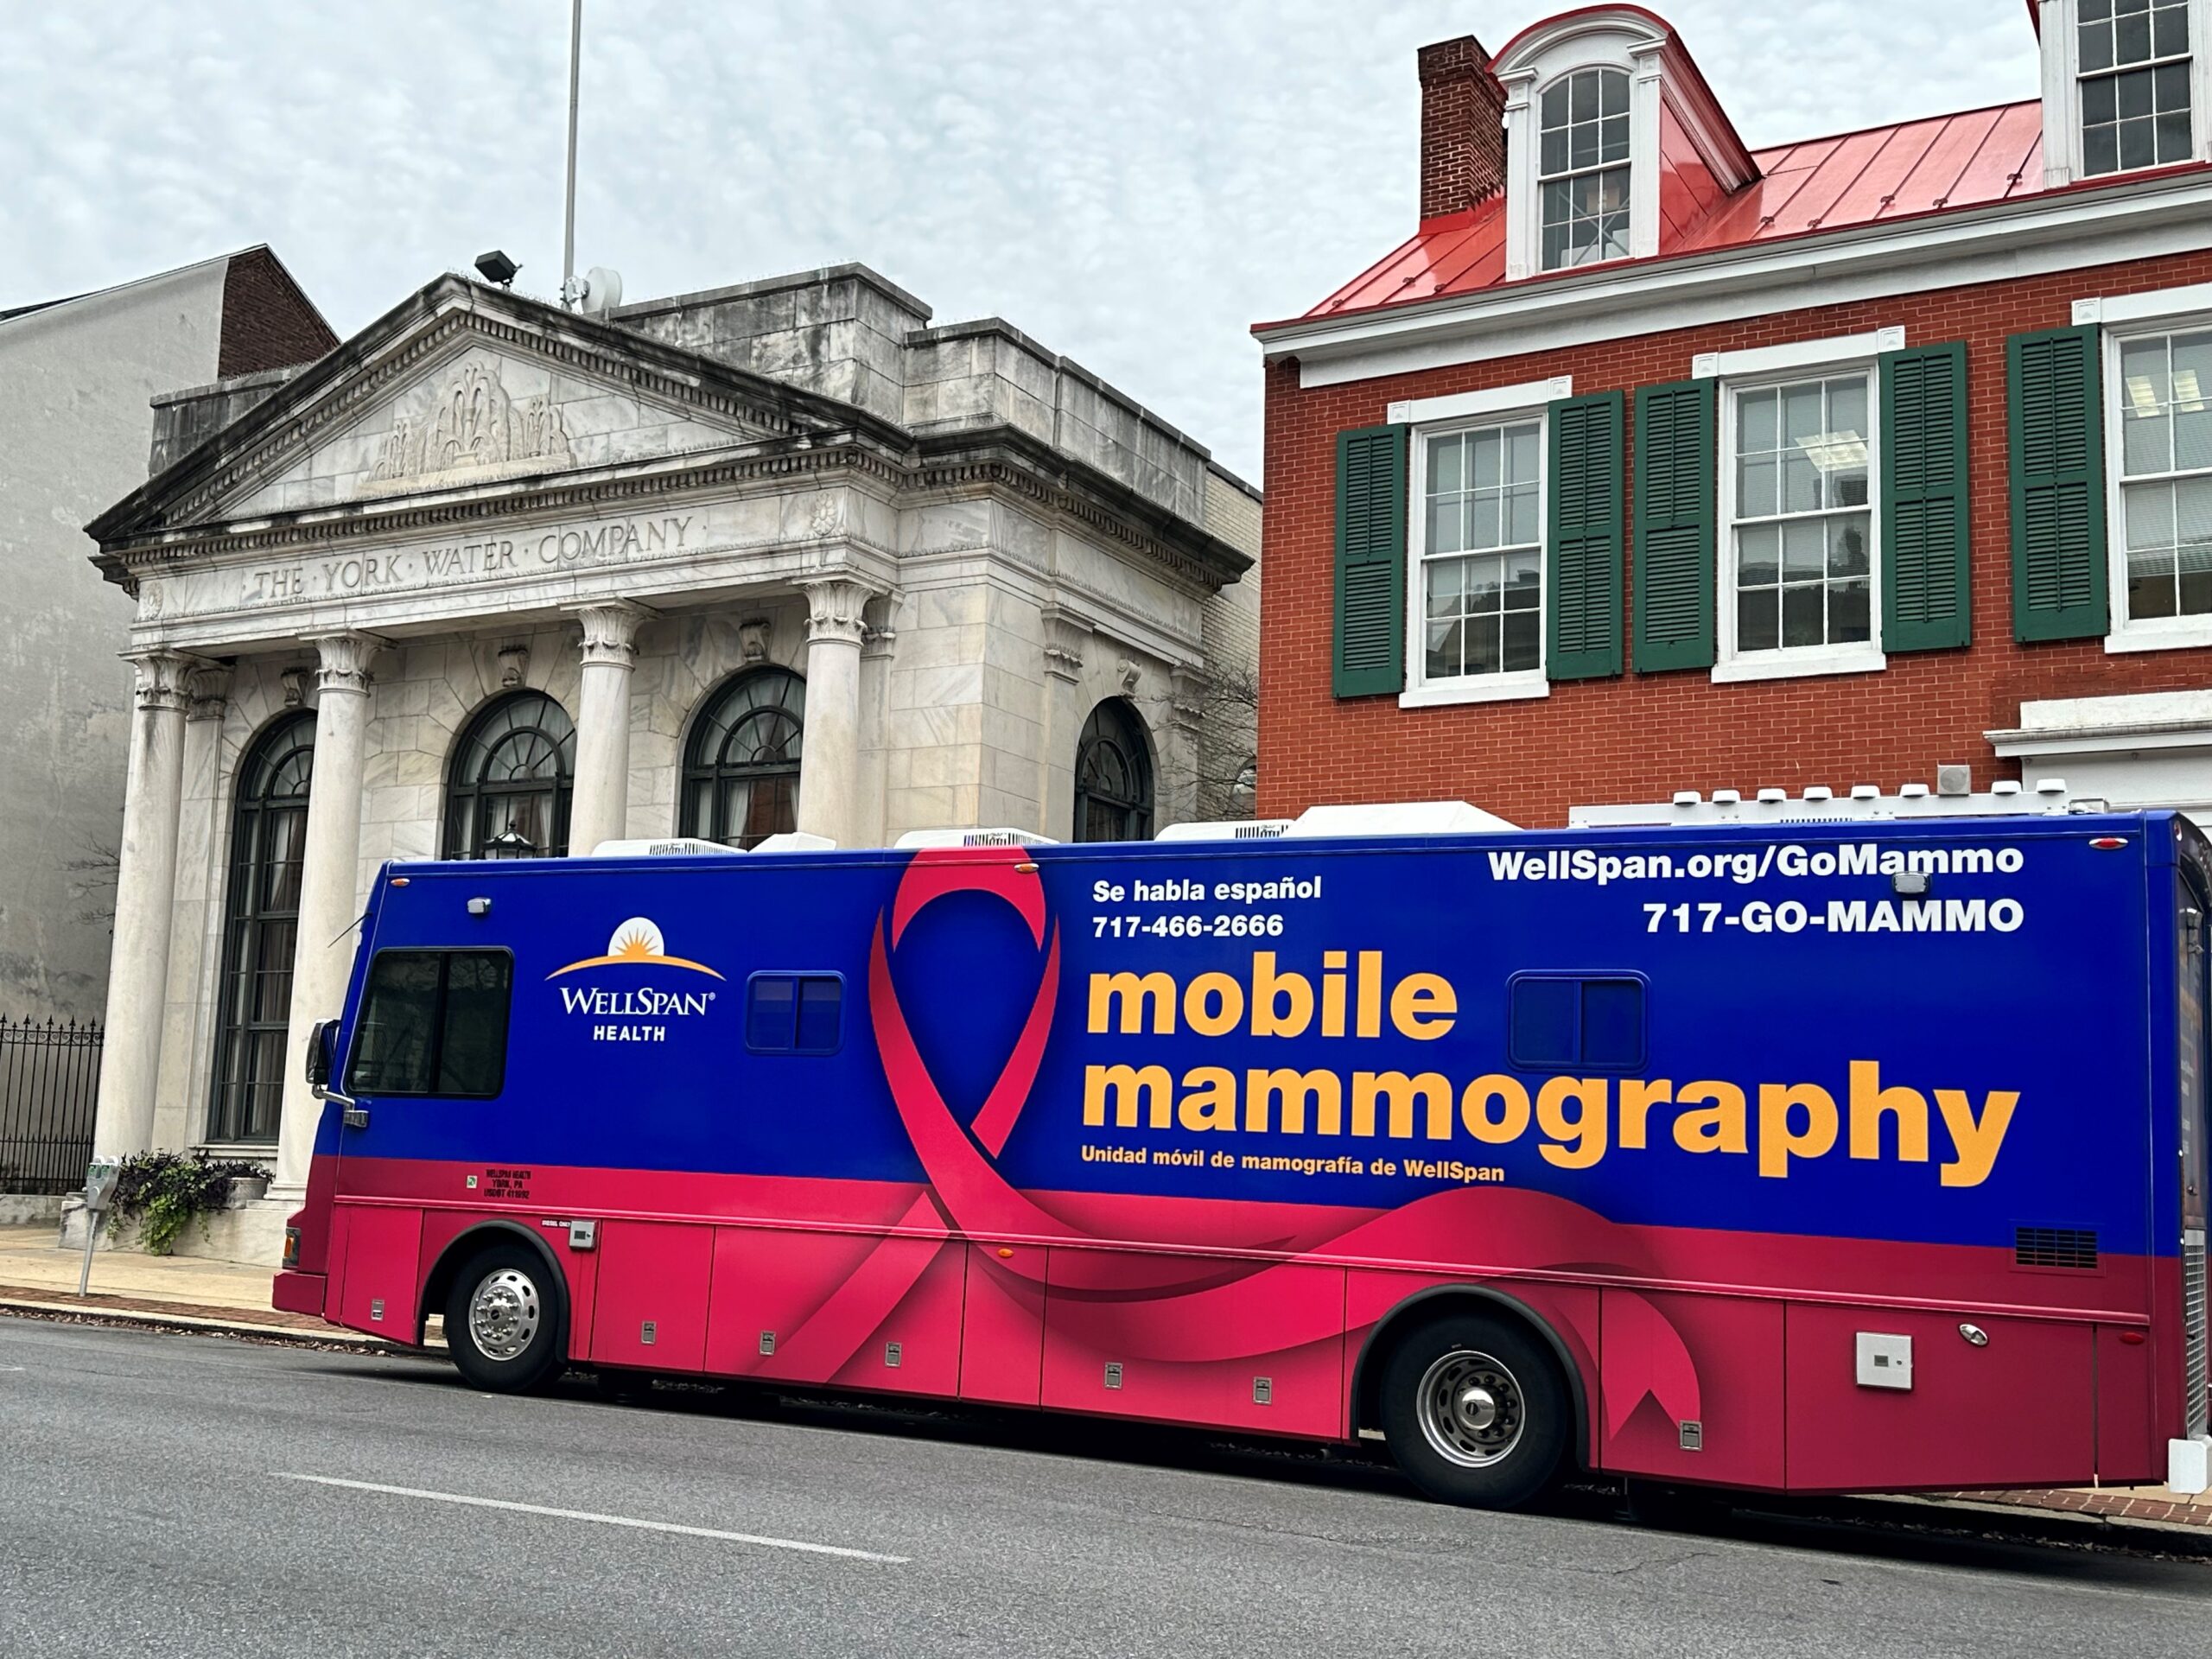 The WellSpan Mobile Mammography bus is parked in front of the York Water Company building.